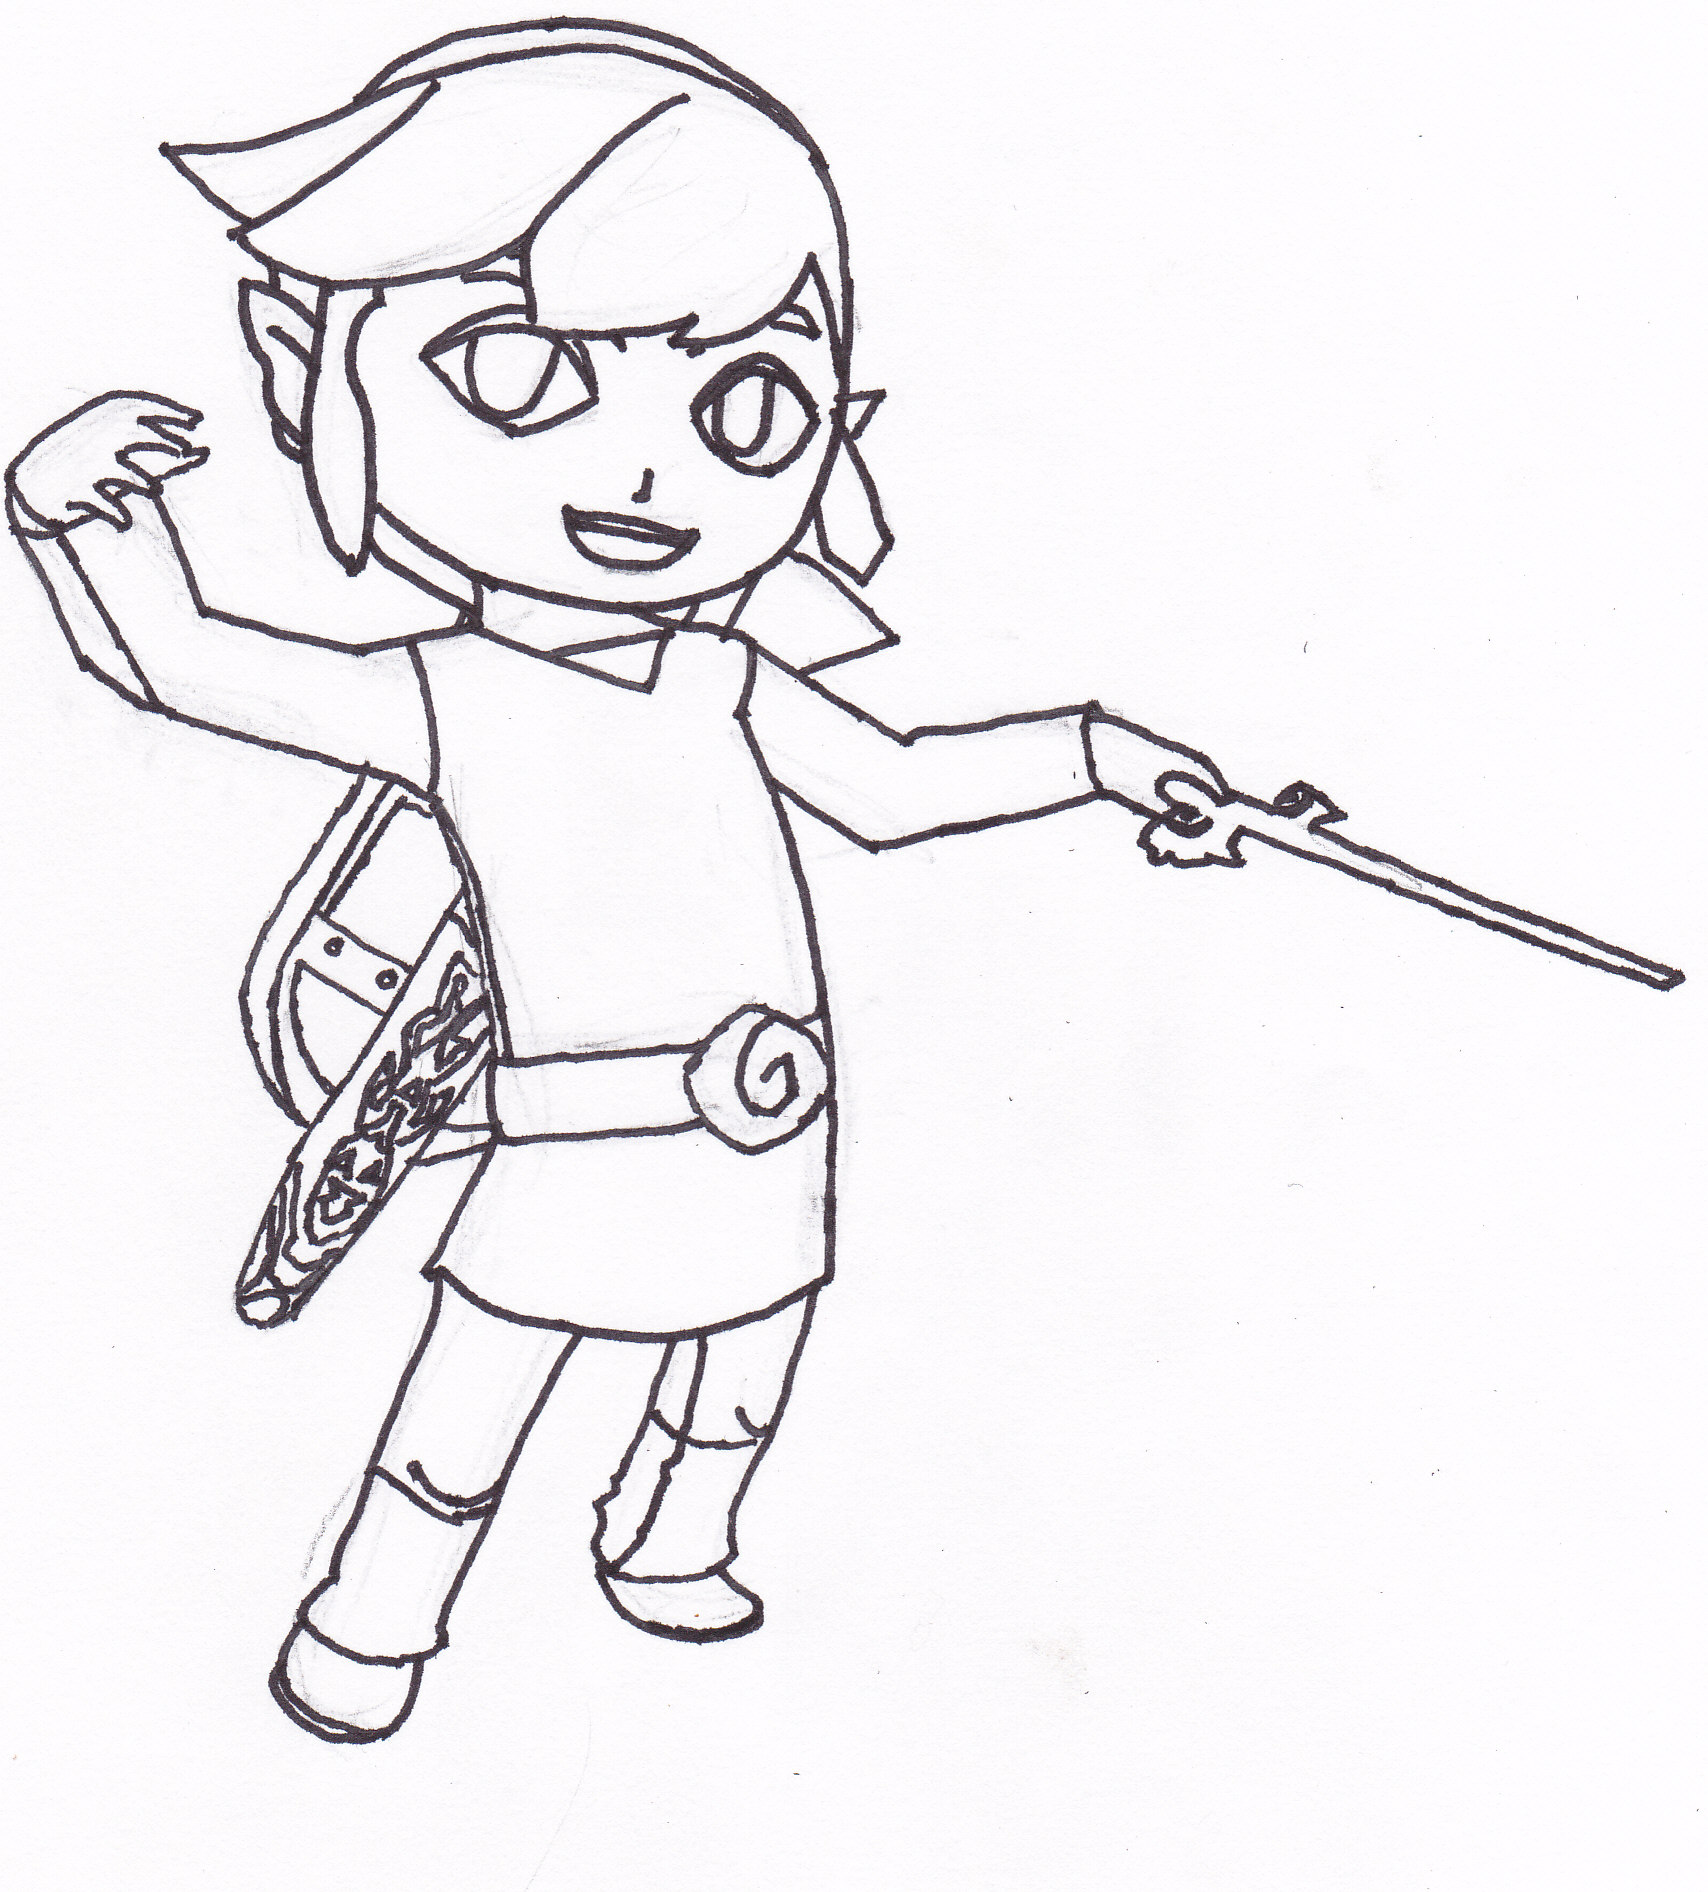 Toon link line art by ira